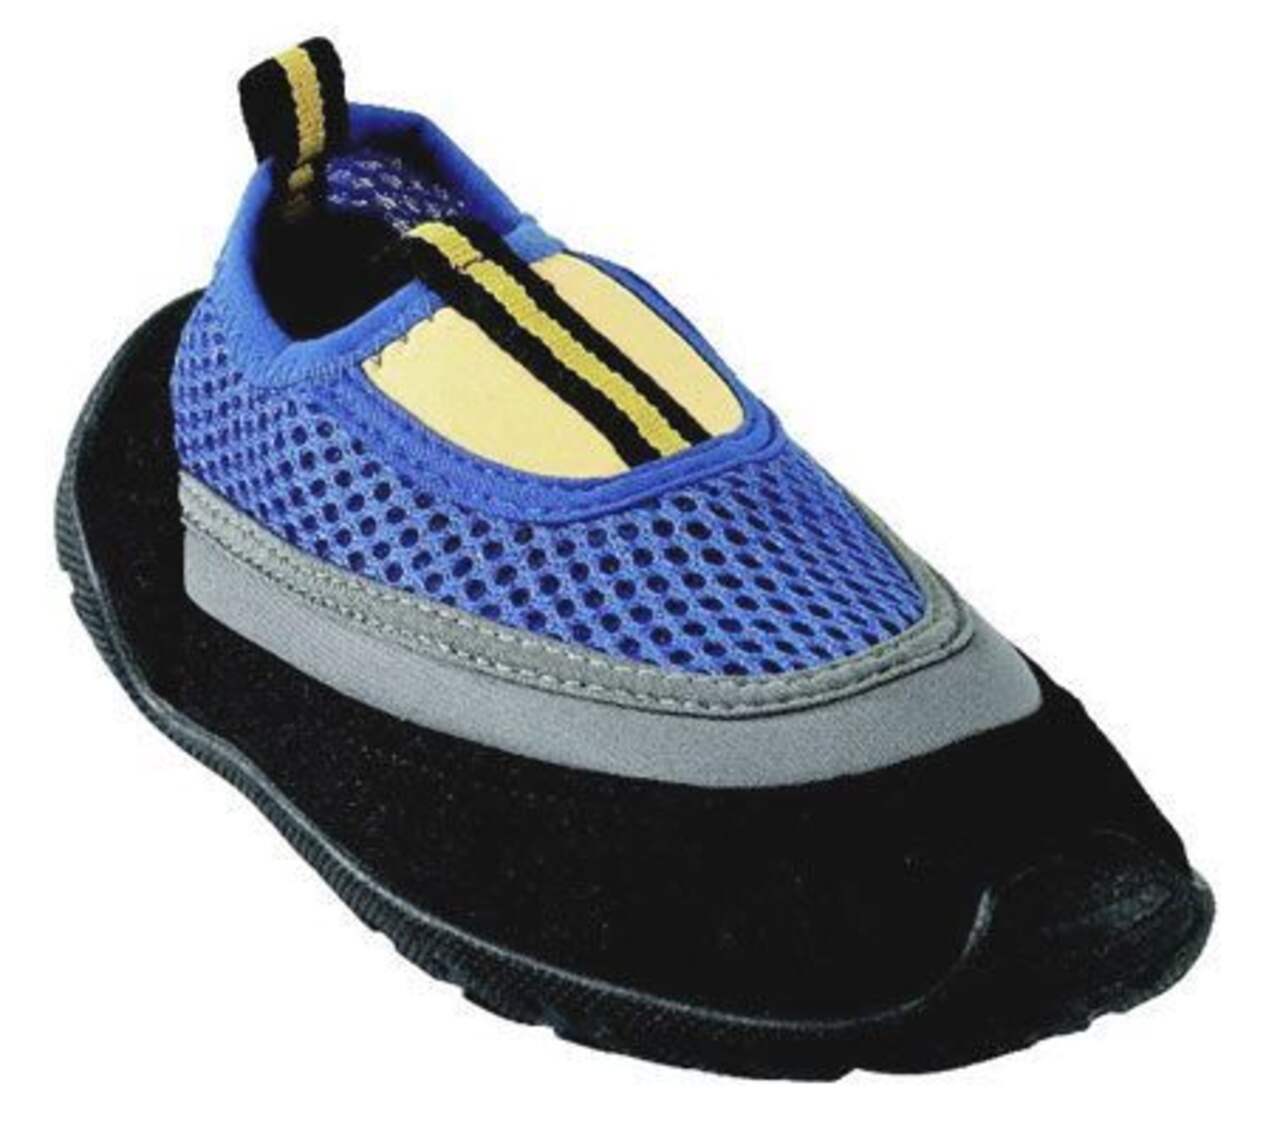 Outbound Men's Slip-on Water Shoes, Blue/Black